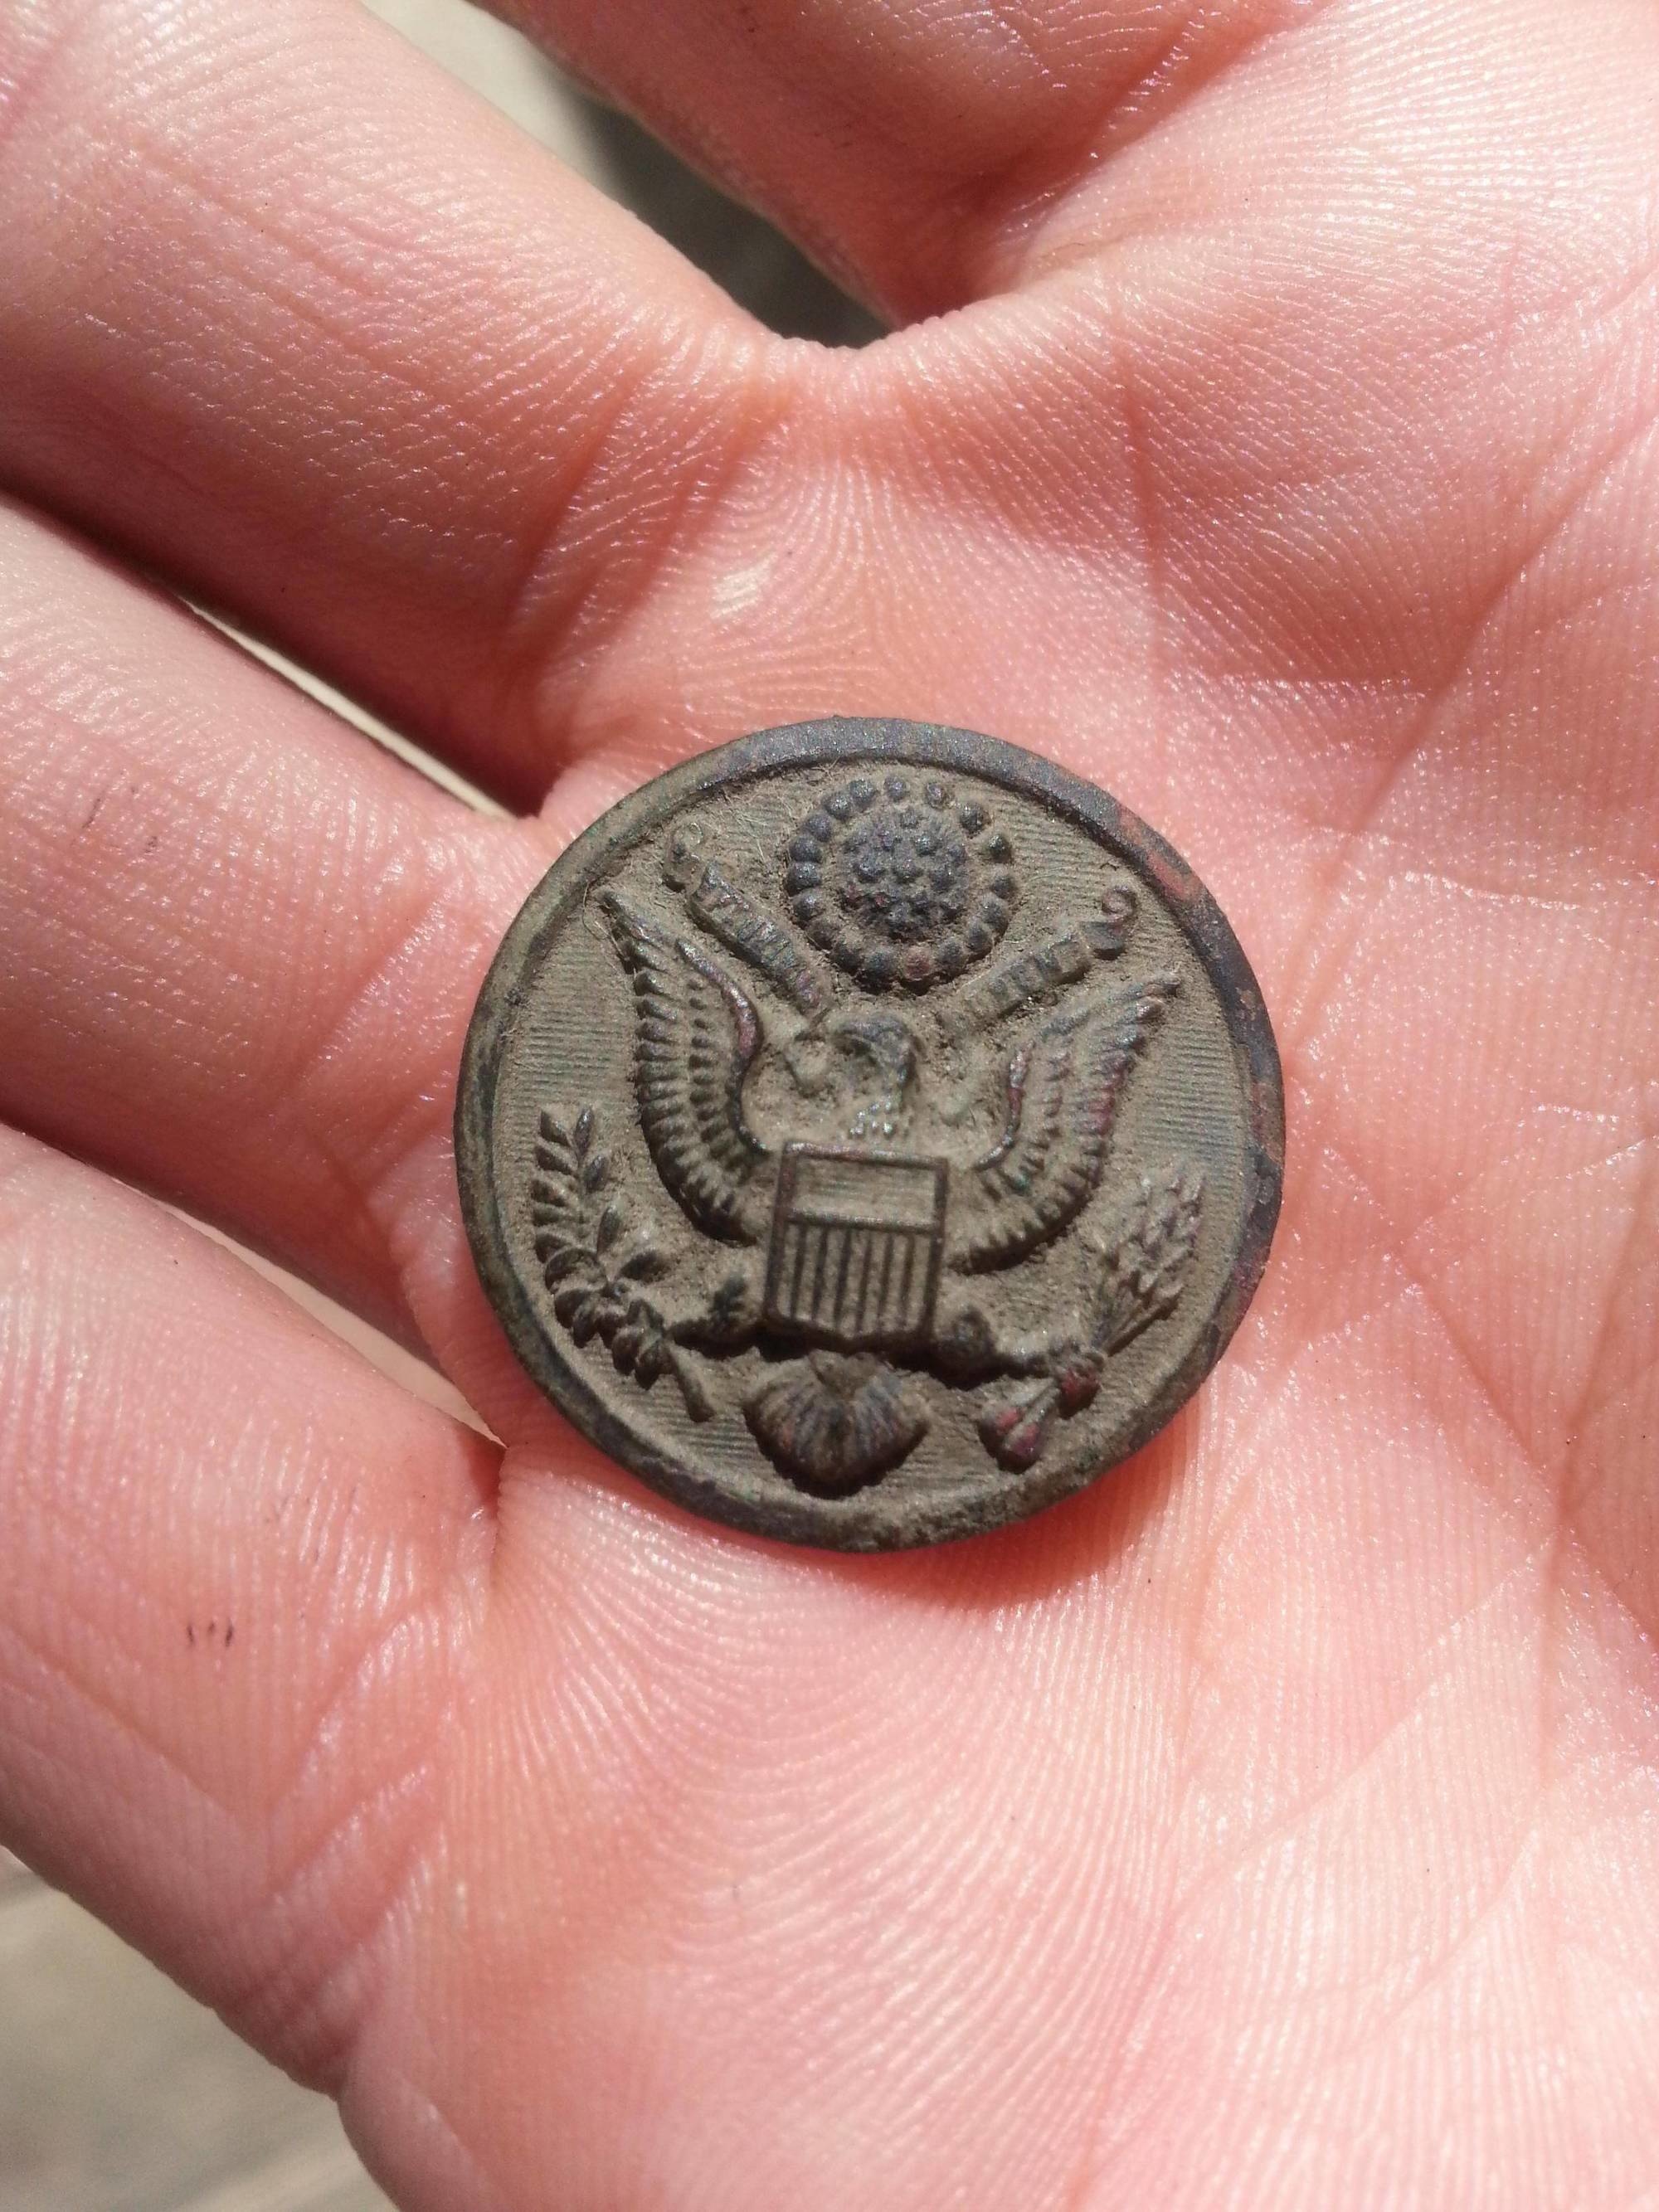 A WWII button. 